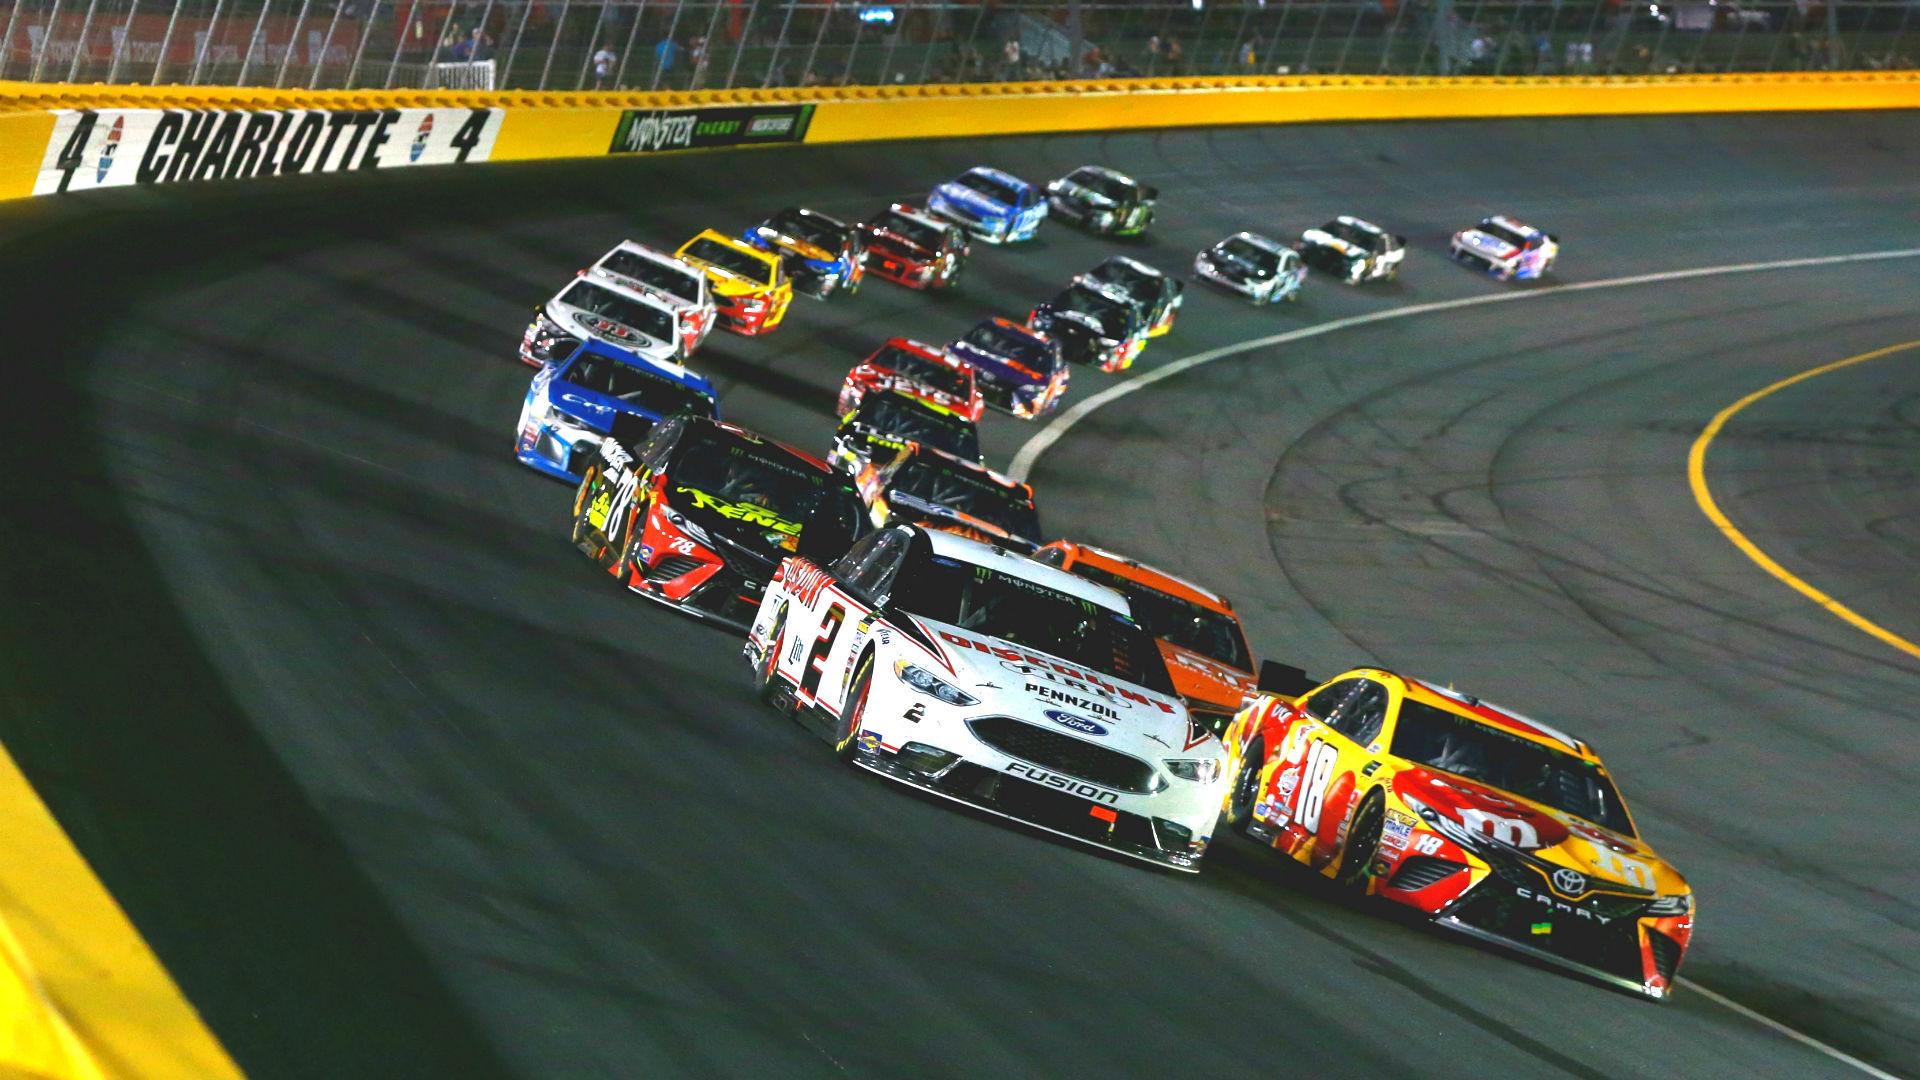 NASCAR All Star Race Format For 2019: Rules, Stage Lengths, How